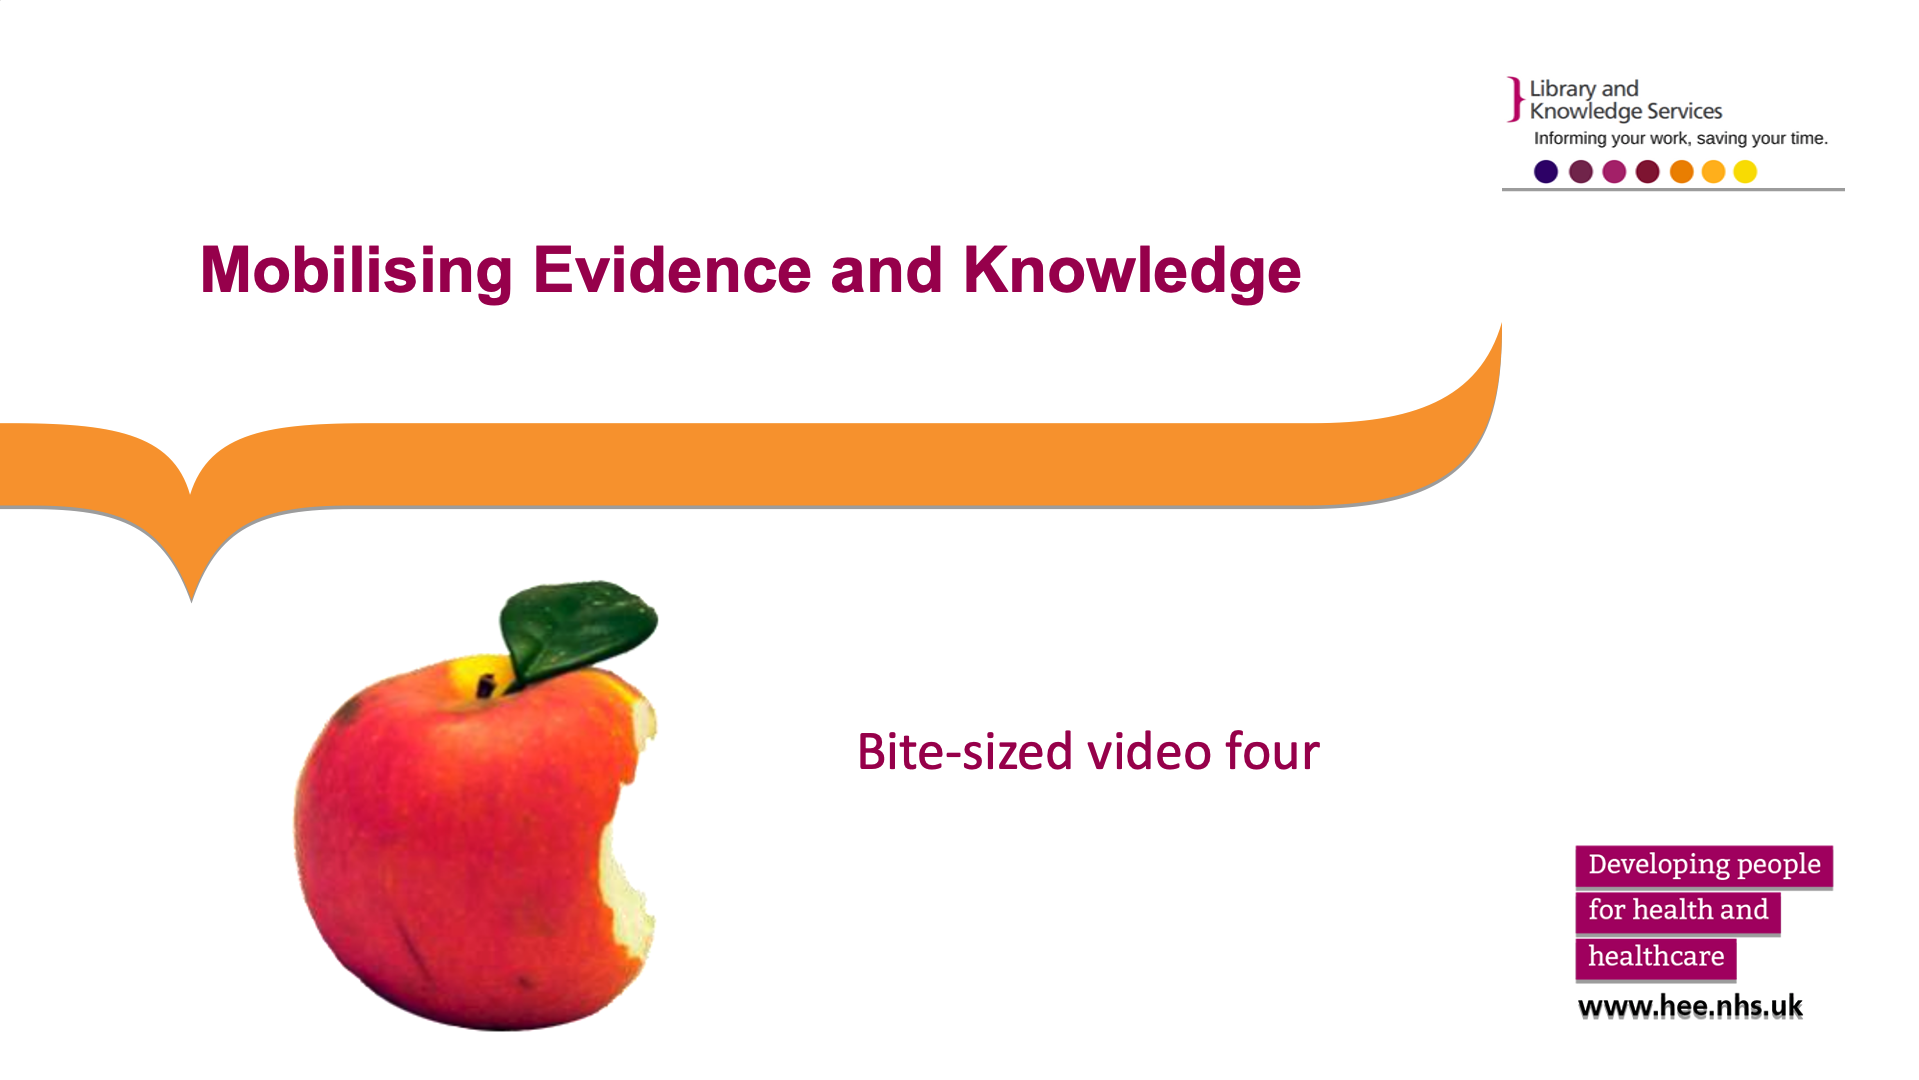 Title slide: image of an apple with a bite taken out of it next to the caption 'bite-sized video four'